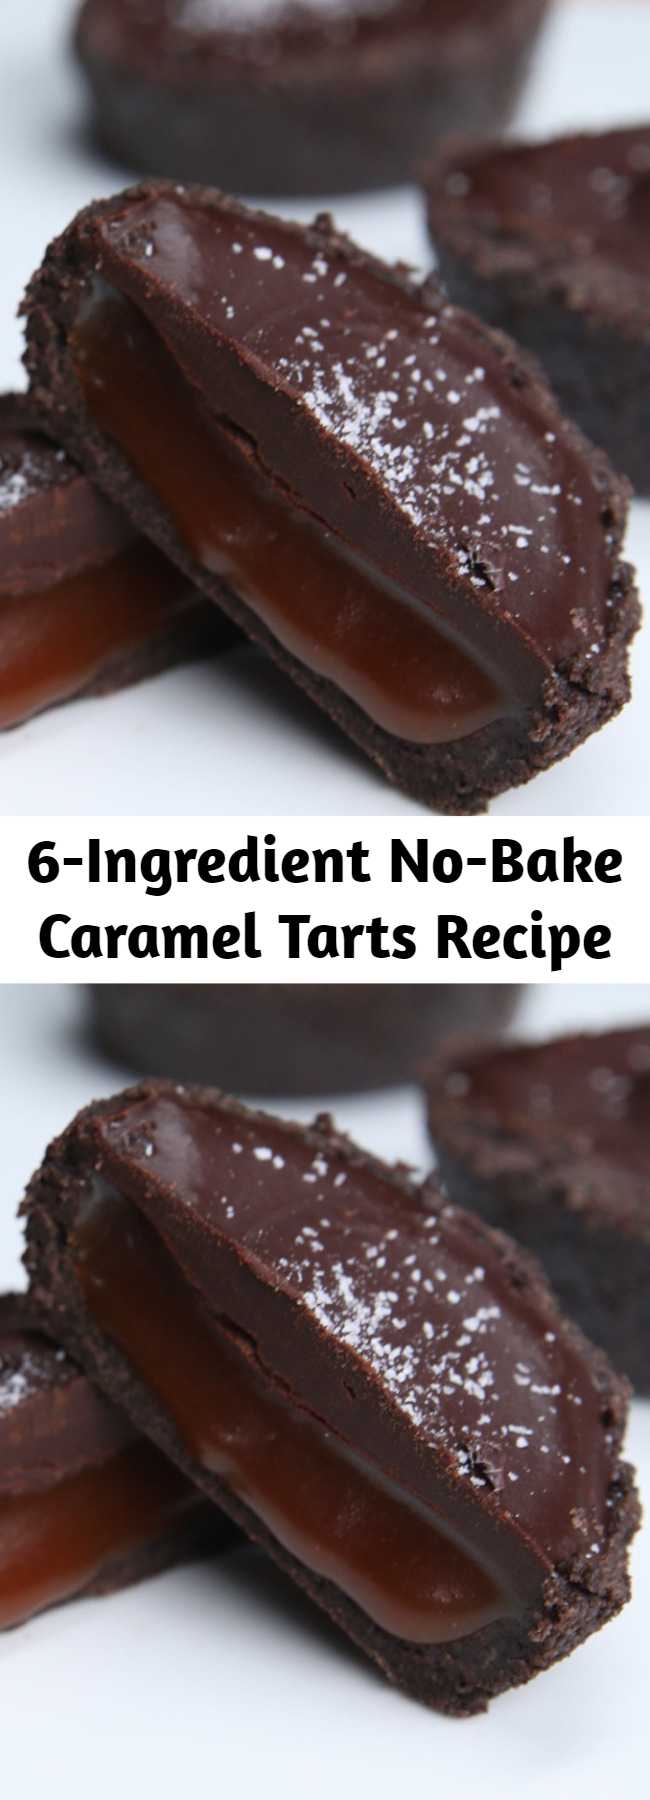 6-Ingredient No-Bake Caramel Tarts Recipe - This is seriously one of the easiest, most impressive desserts ever.